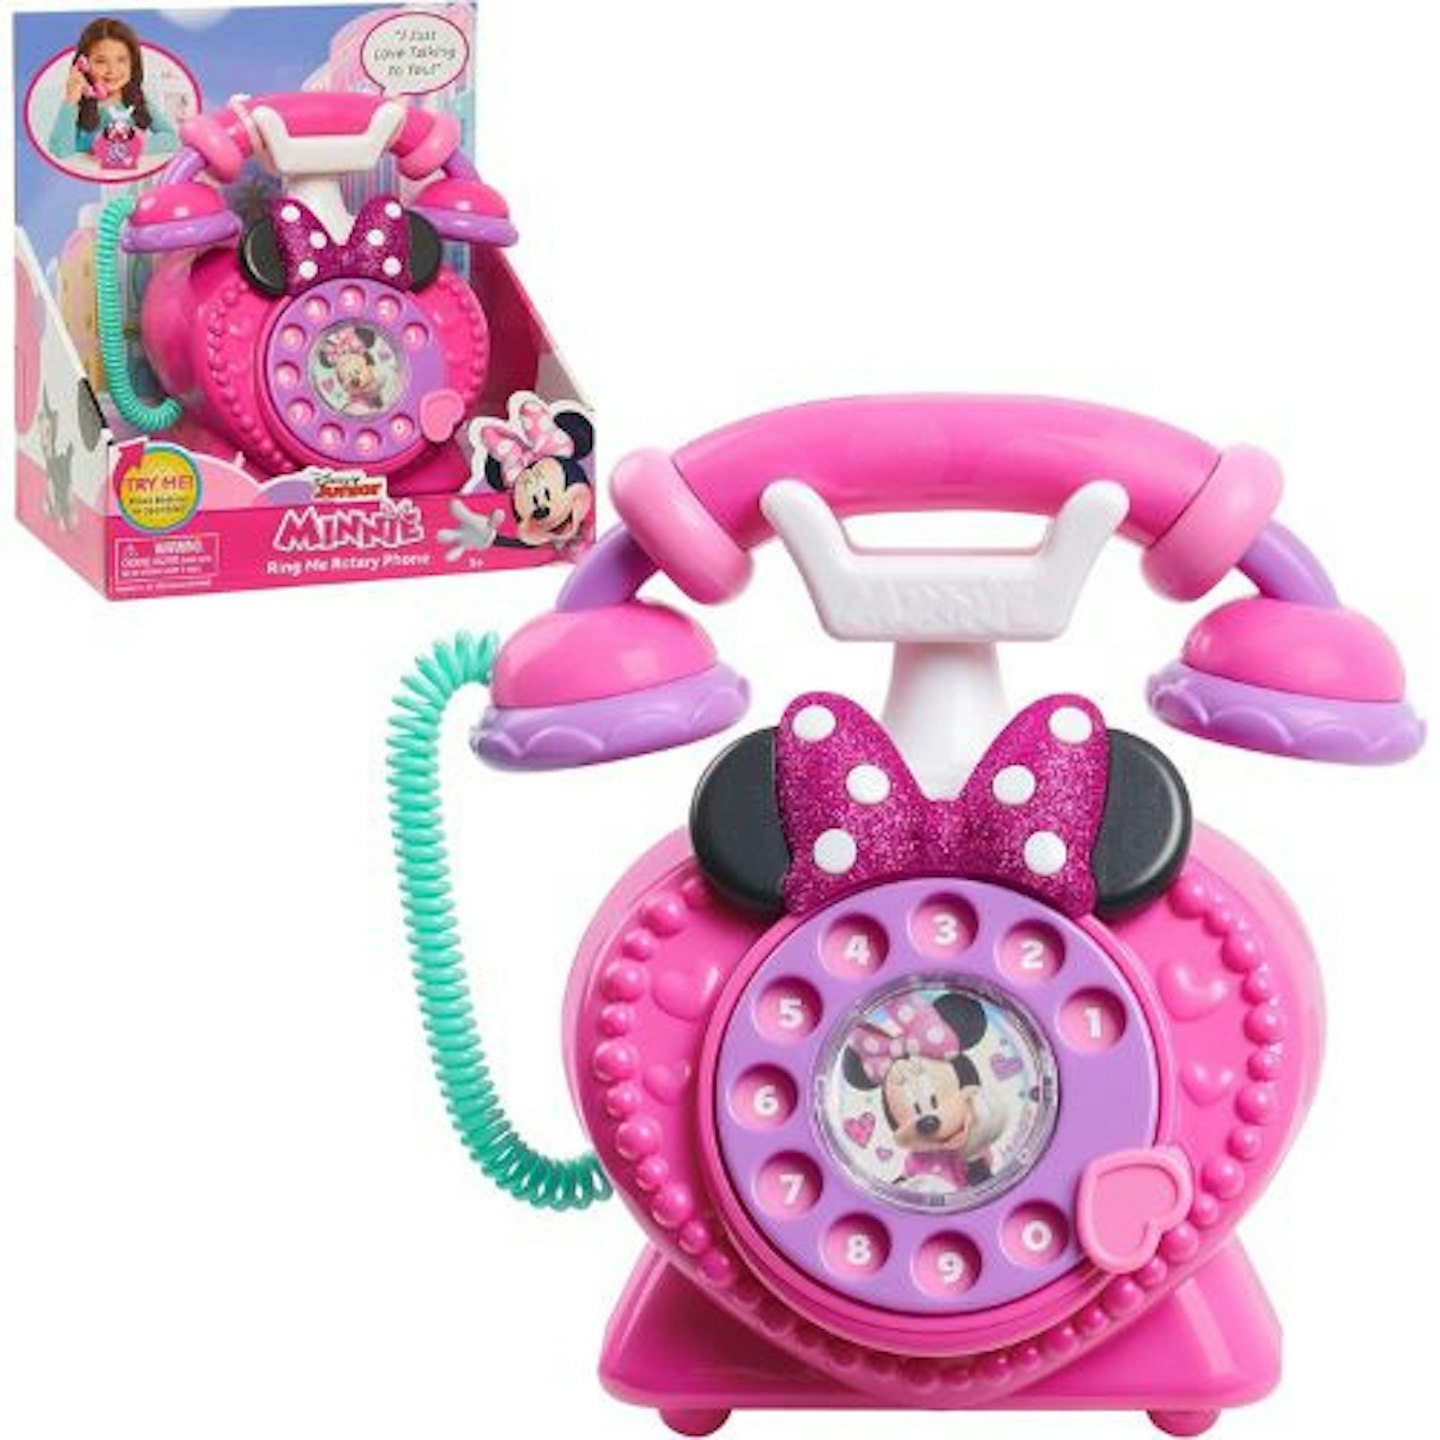 Best Minnie Mouse toy Disney Junior Minnie Mouse Ring Me Rotary Phone 